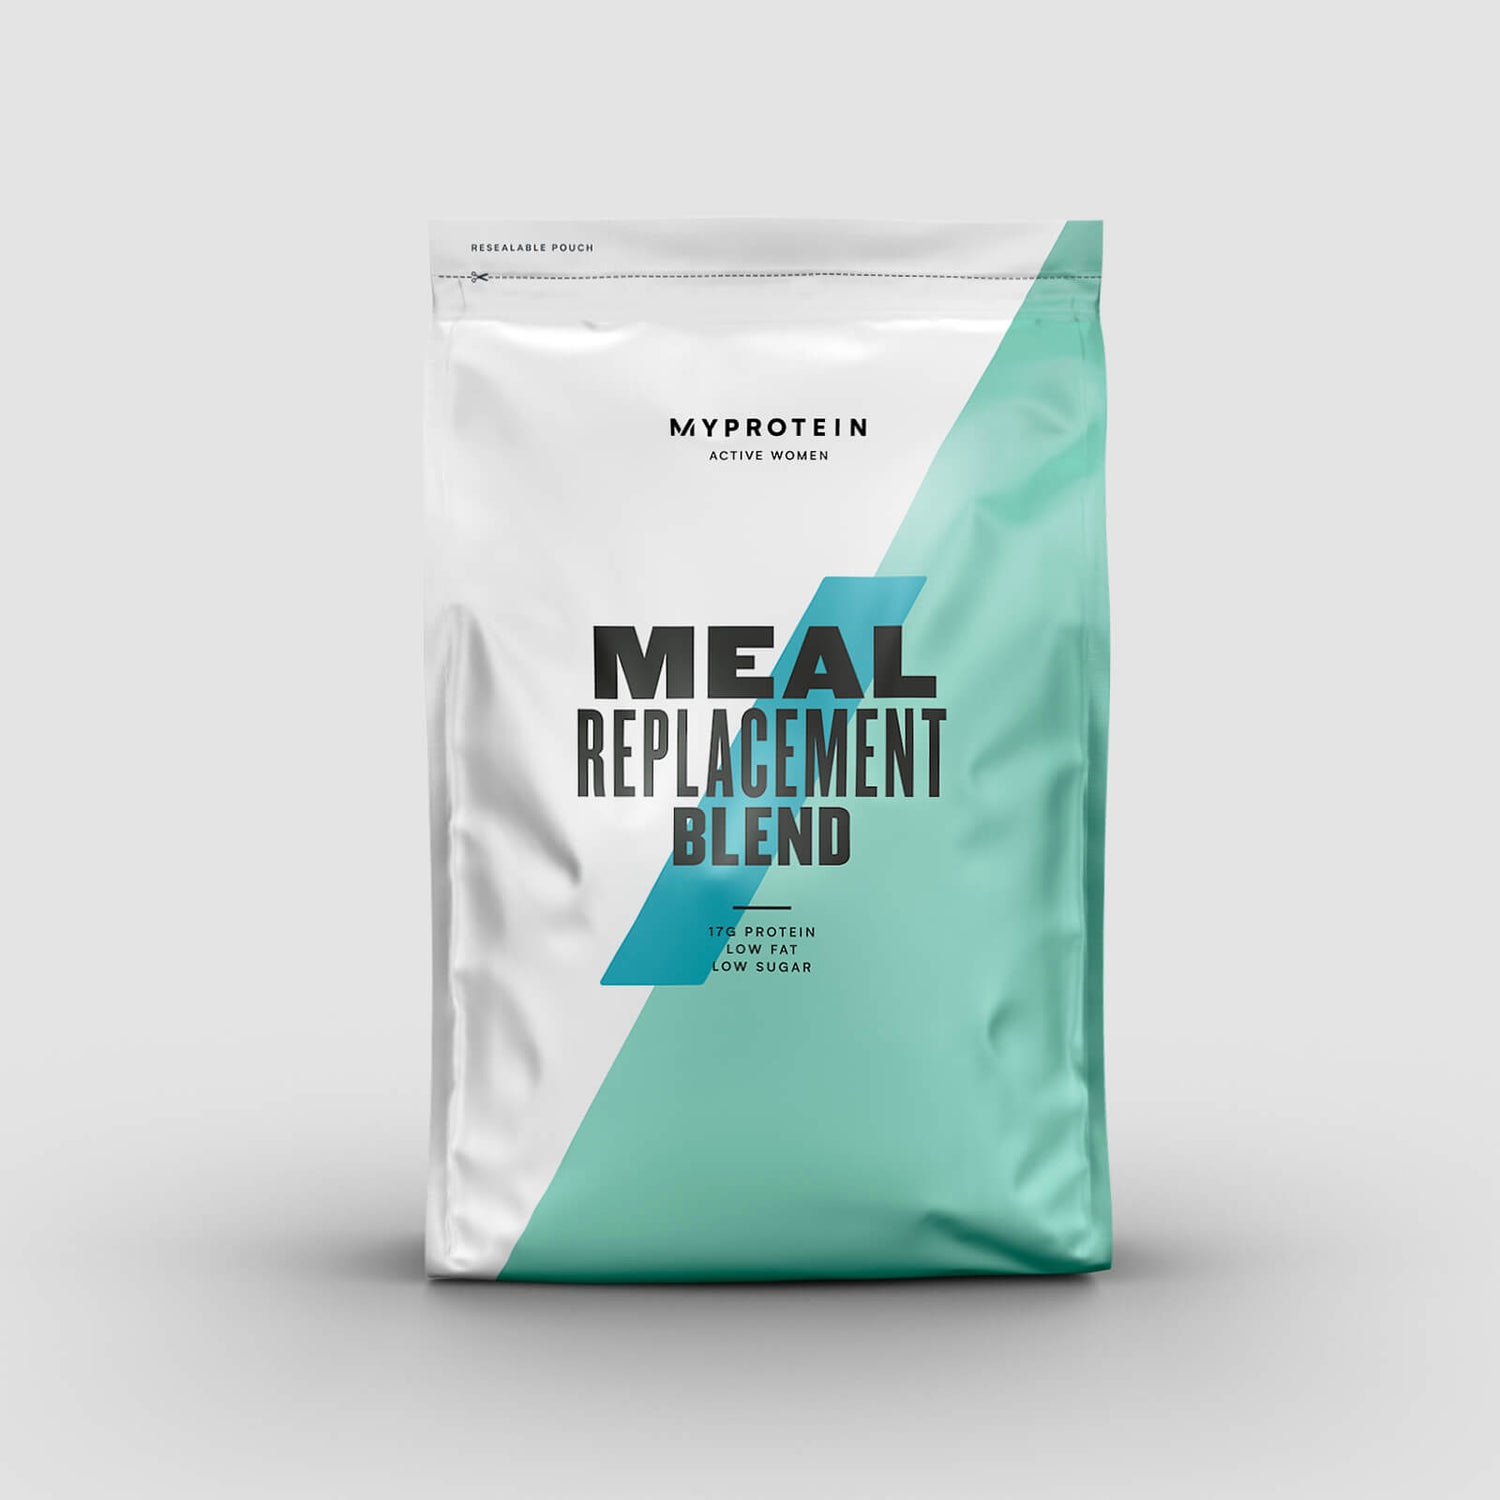 Meal replacement